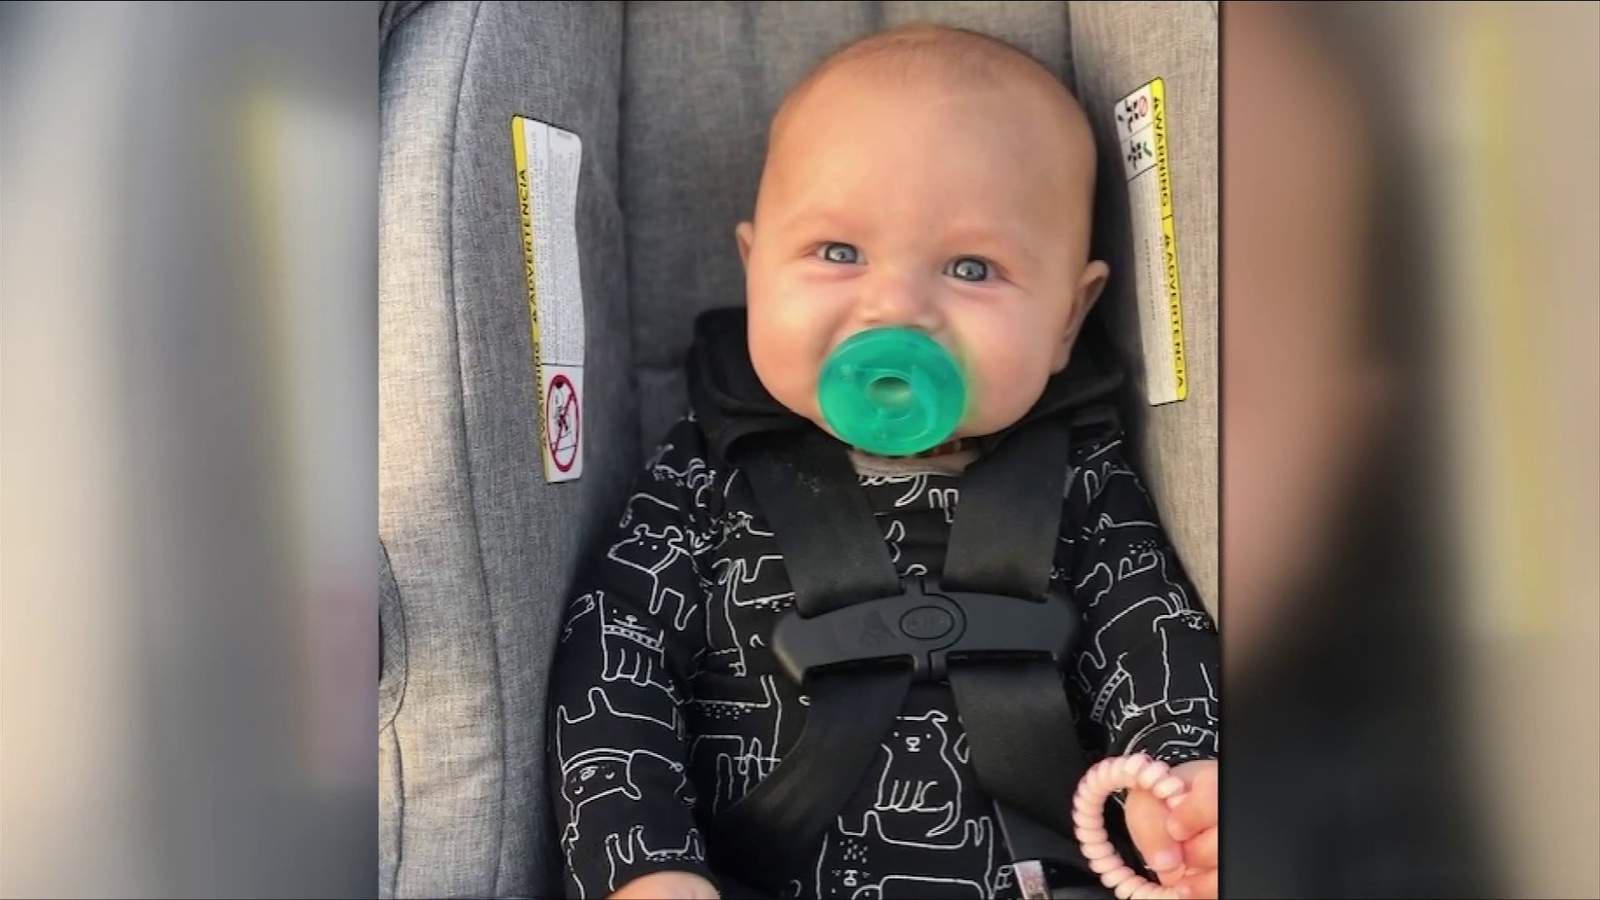 ‘A Christmas miracle’: Insurance company covers cochlear implant surgery for Clifton Forge baby